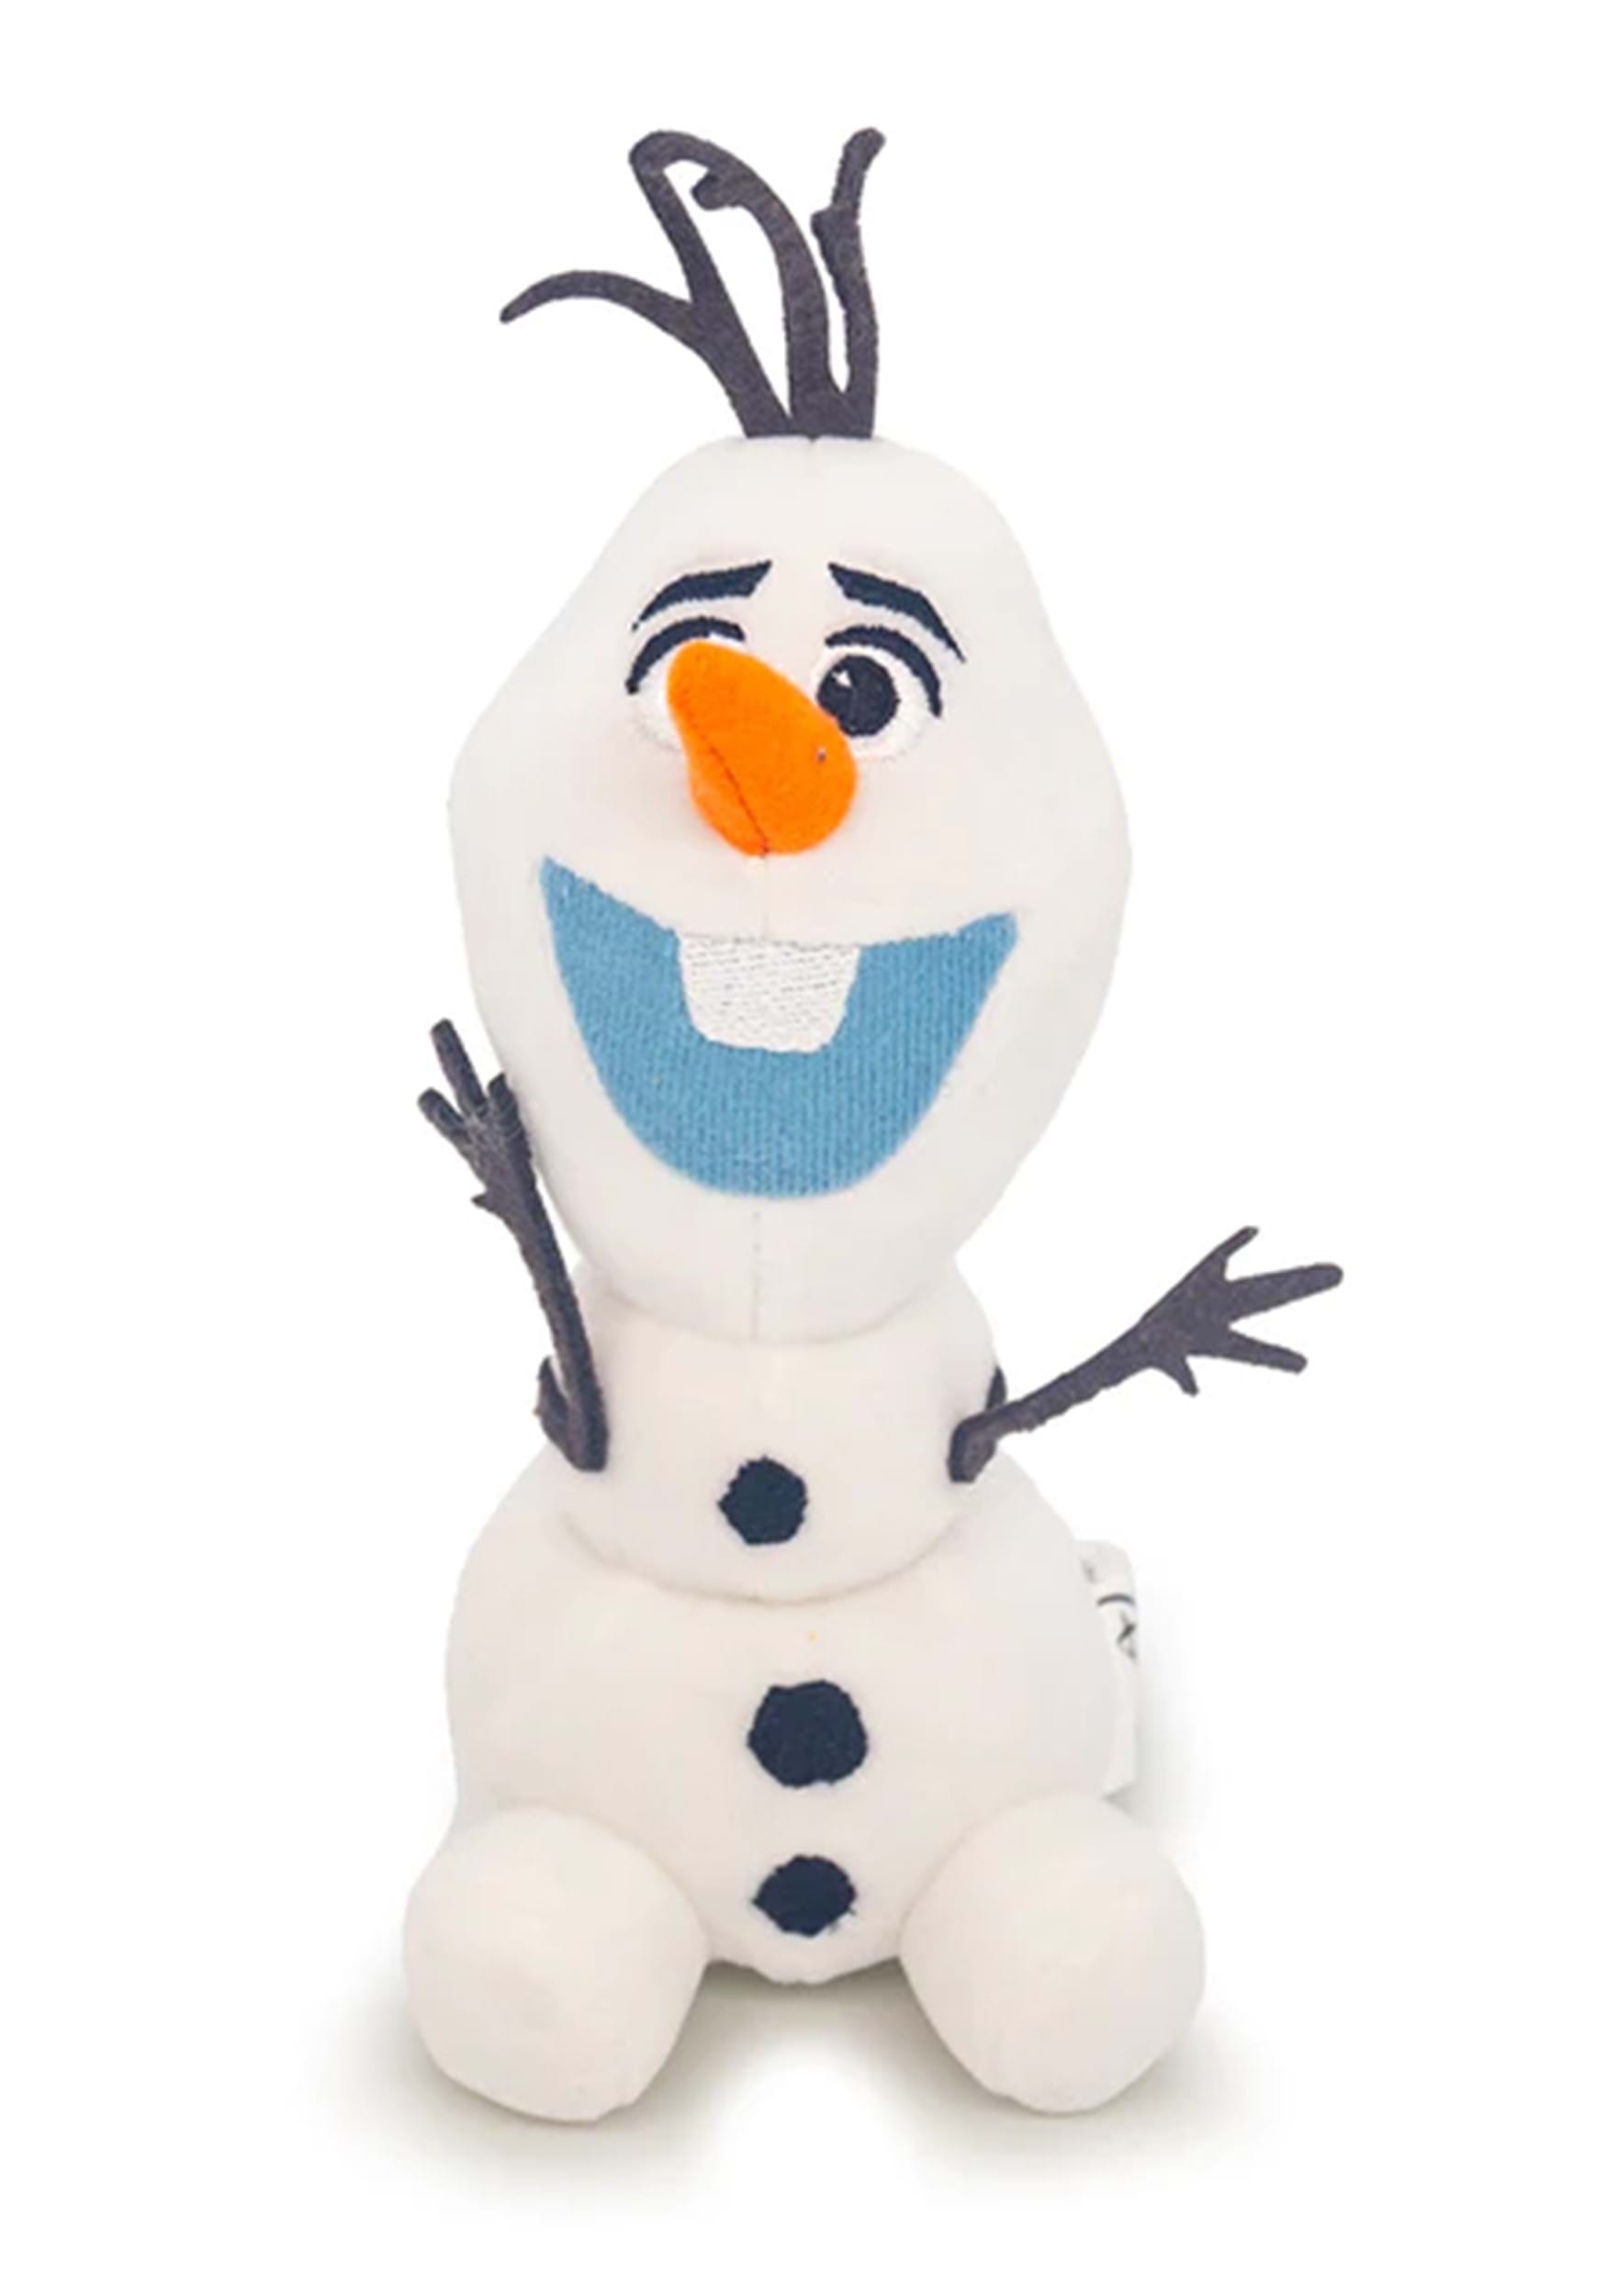 https://images.fun.com/products/90086/1-1/frozen-olaf-squeaker-plush-dog-toy.jpg